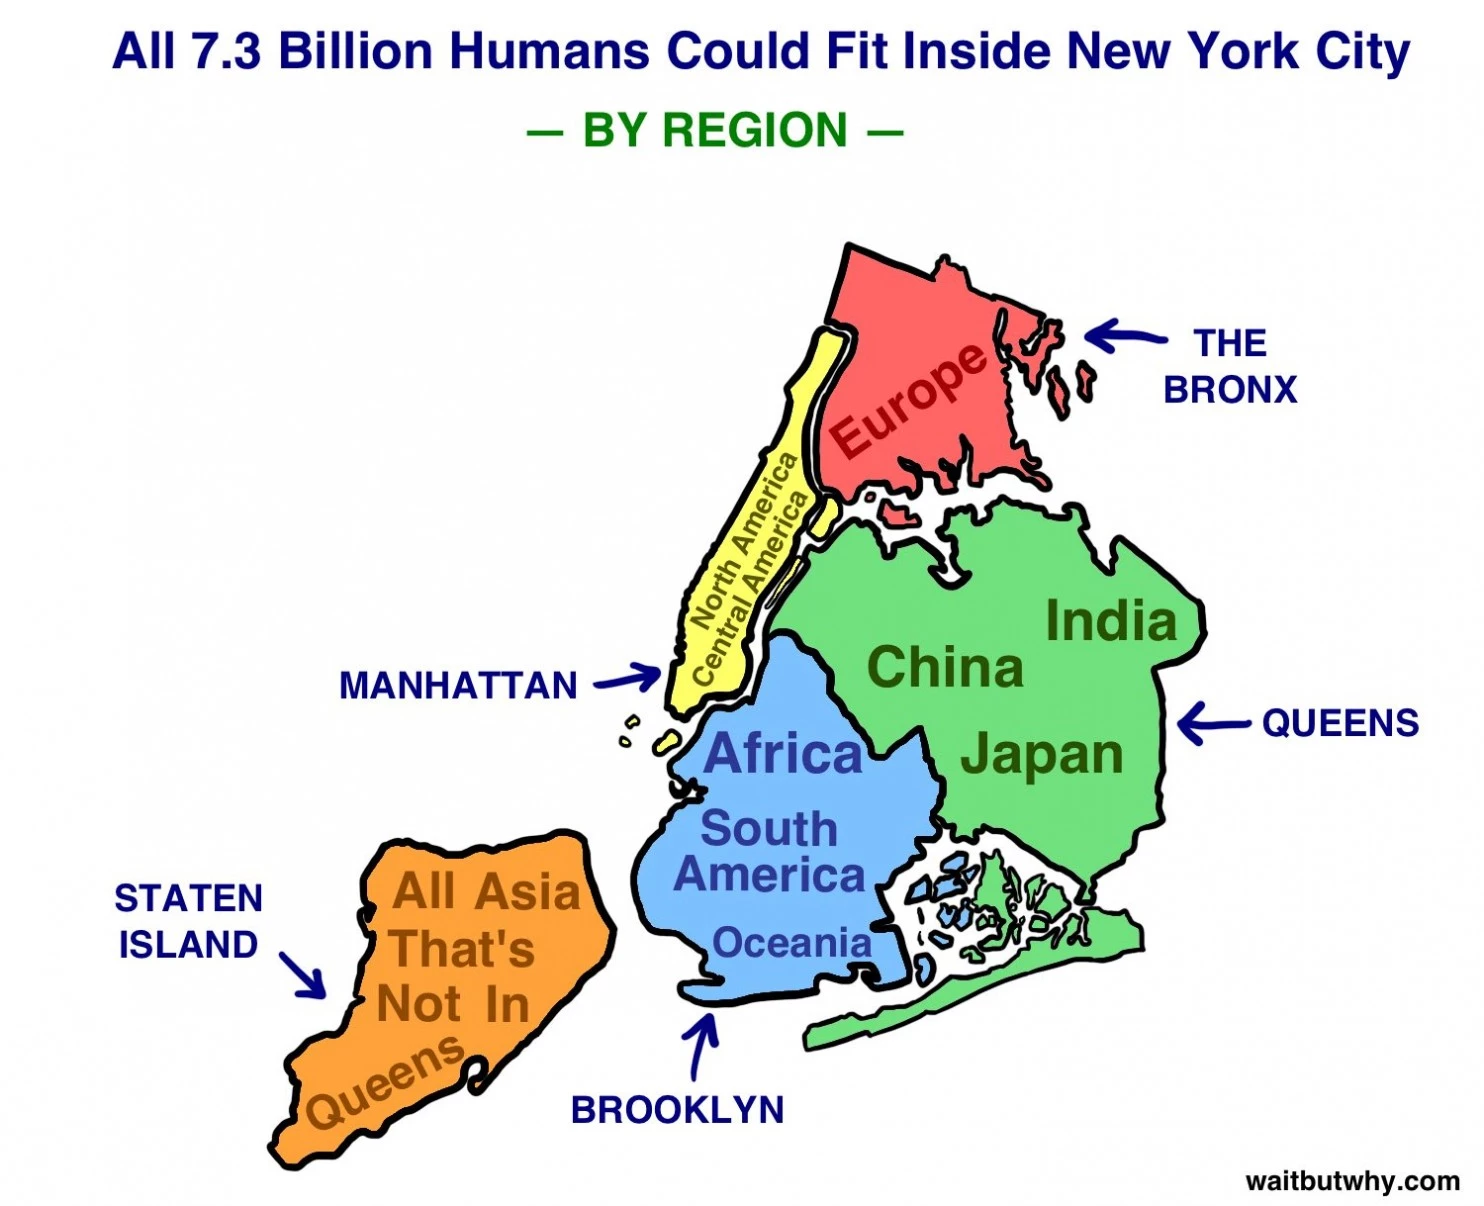 the world's population can fit inside NYC